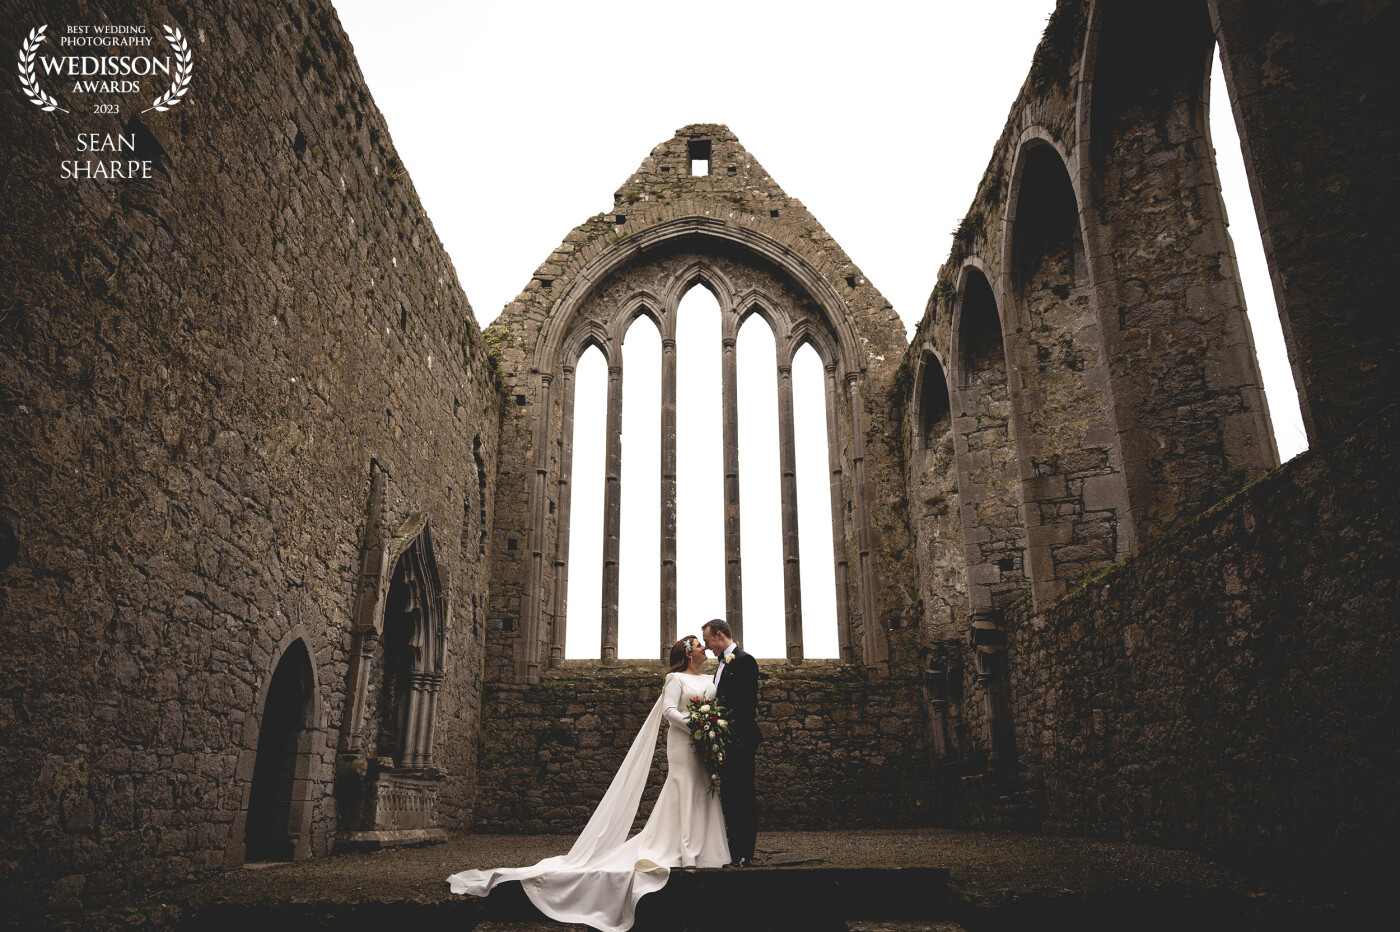 Louise and Sean at the stunning Kilmallock Friary in Limerick. Such an incredible presence in the place and an amazing backdrop to their wedding shoot.